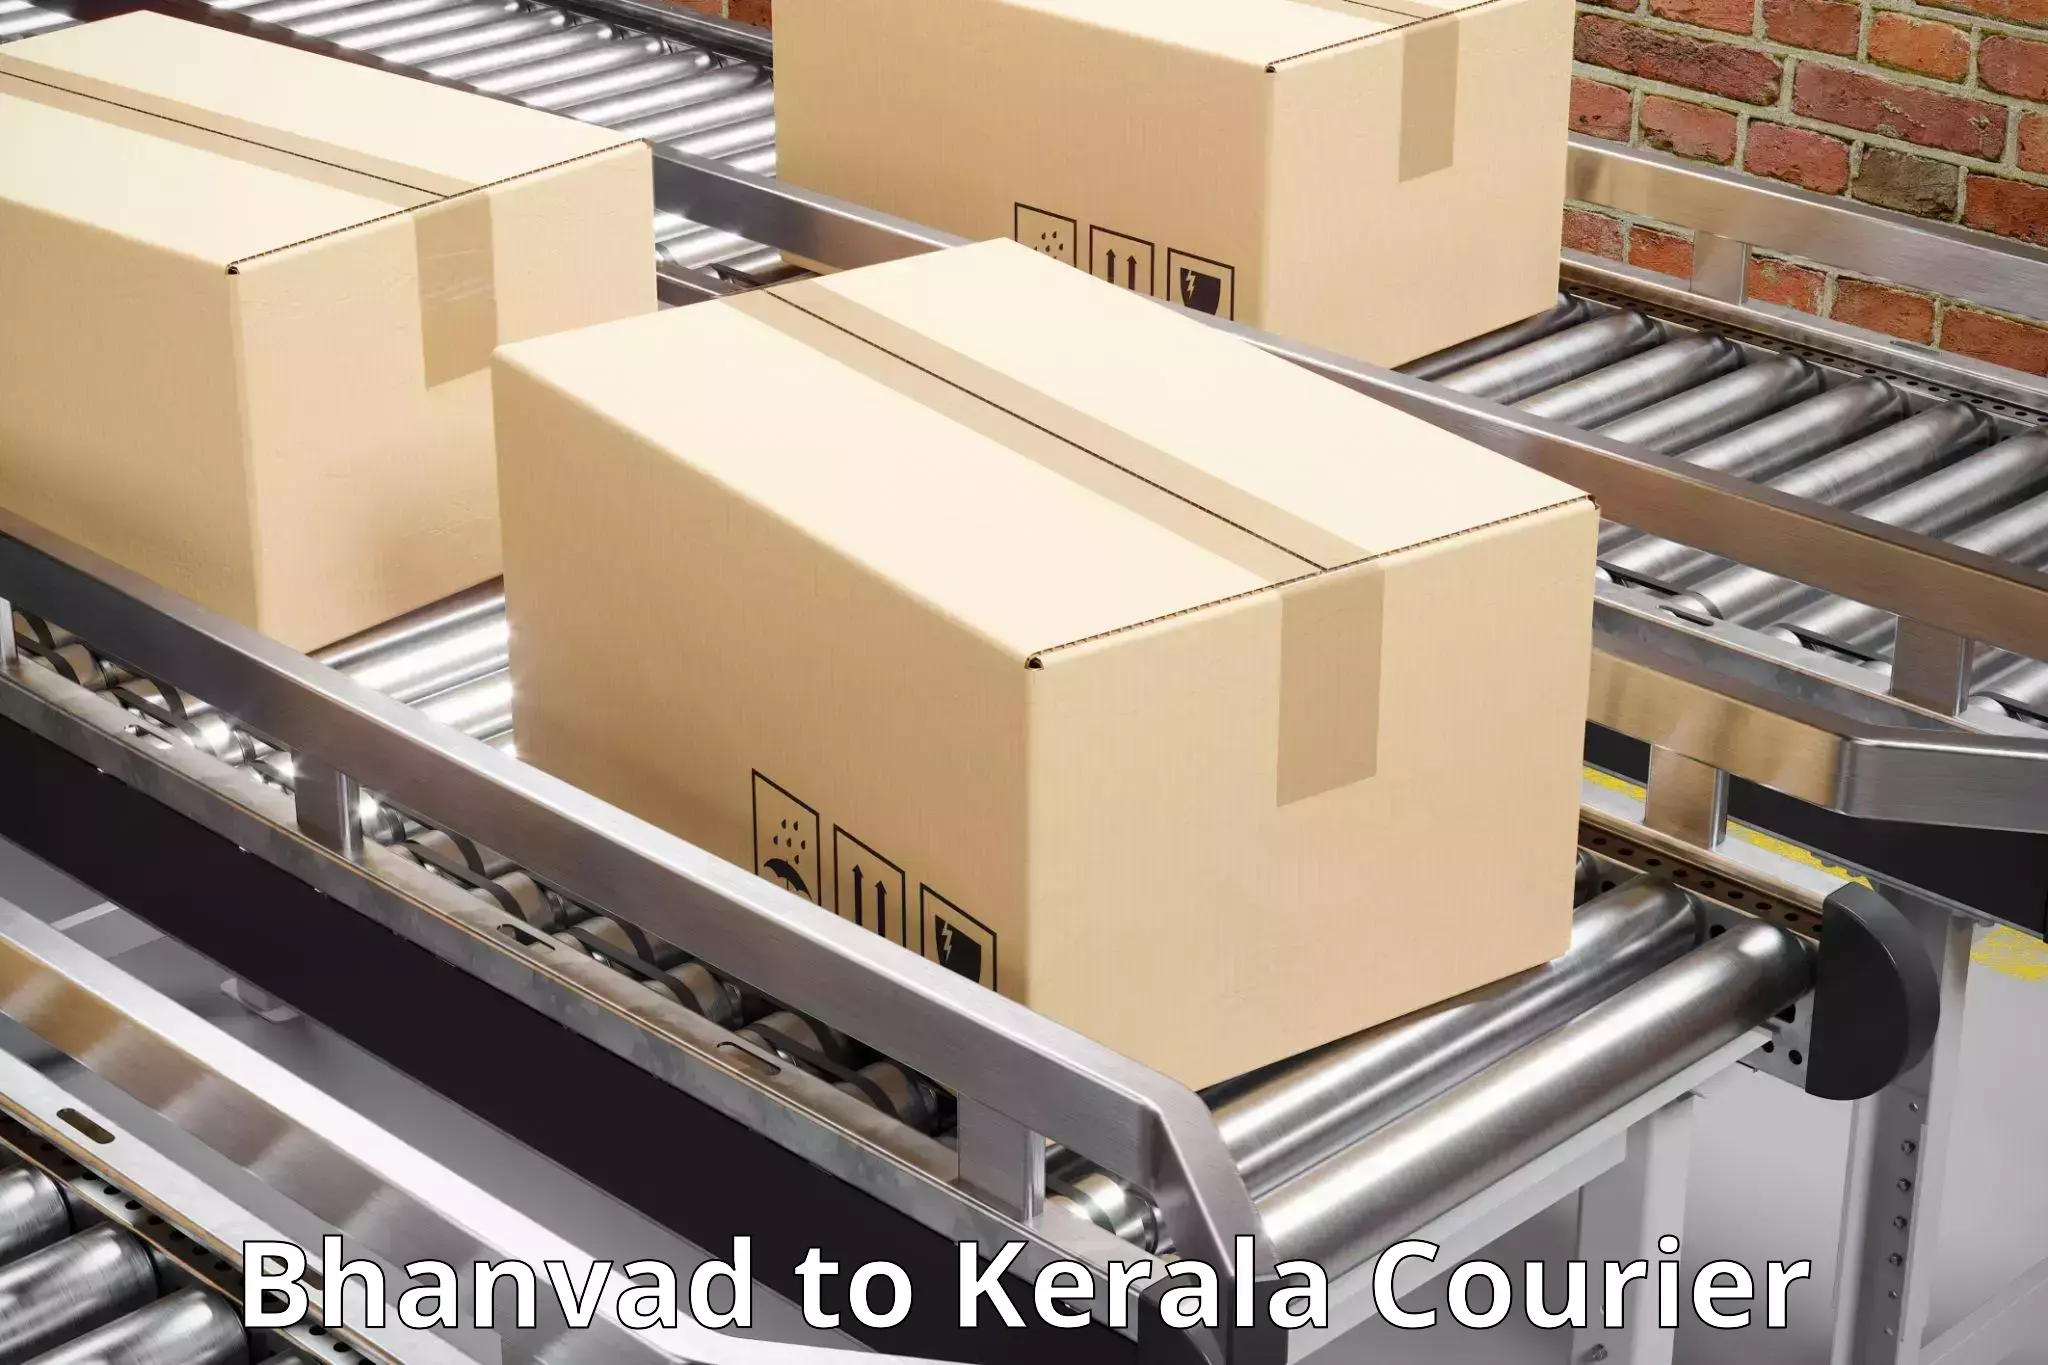 Courier service efficiency in Bhanvad to Koothattukulam